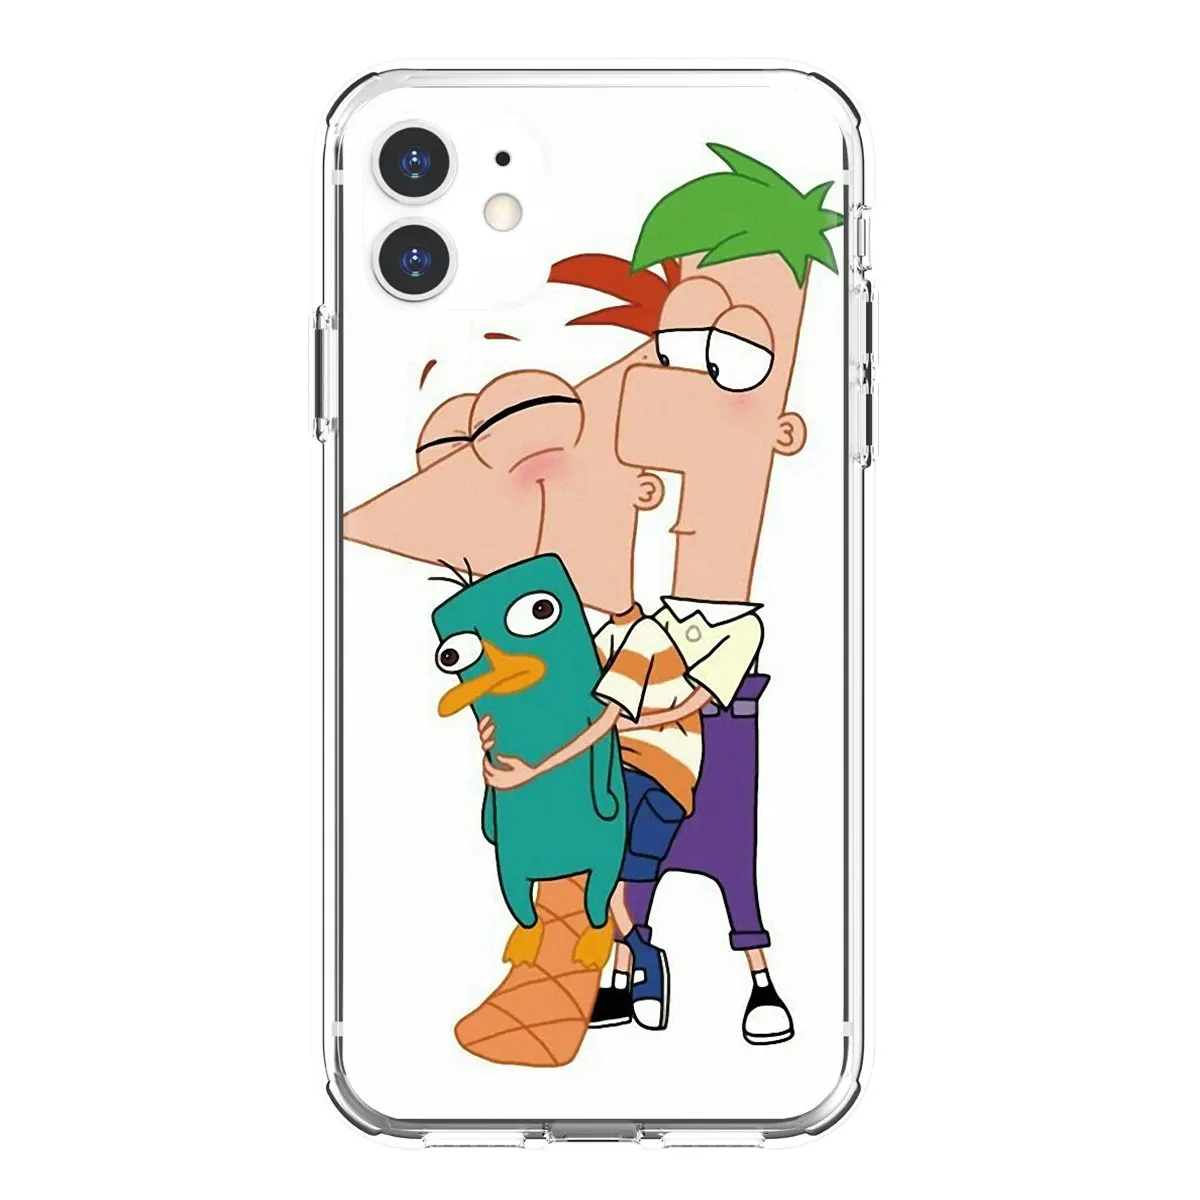 11 cases For iPhone 10 11 12 13 Mini Pro 4S 5S SE 5C 6 6S 7 8 X XR XS Plus Max 2020 Soft Shell Cases Elegant-Phineas-And-Ferb-Star-Wars iphone xr phone case iPhone 11 / XR